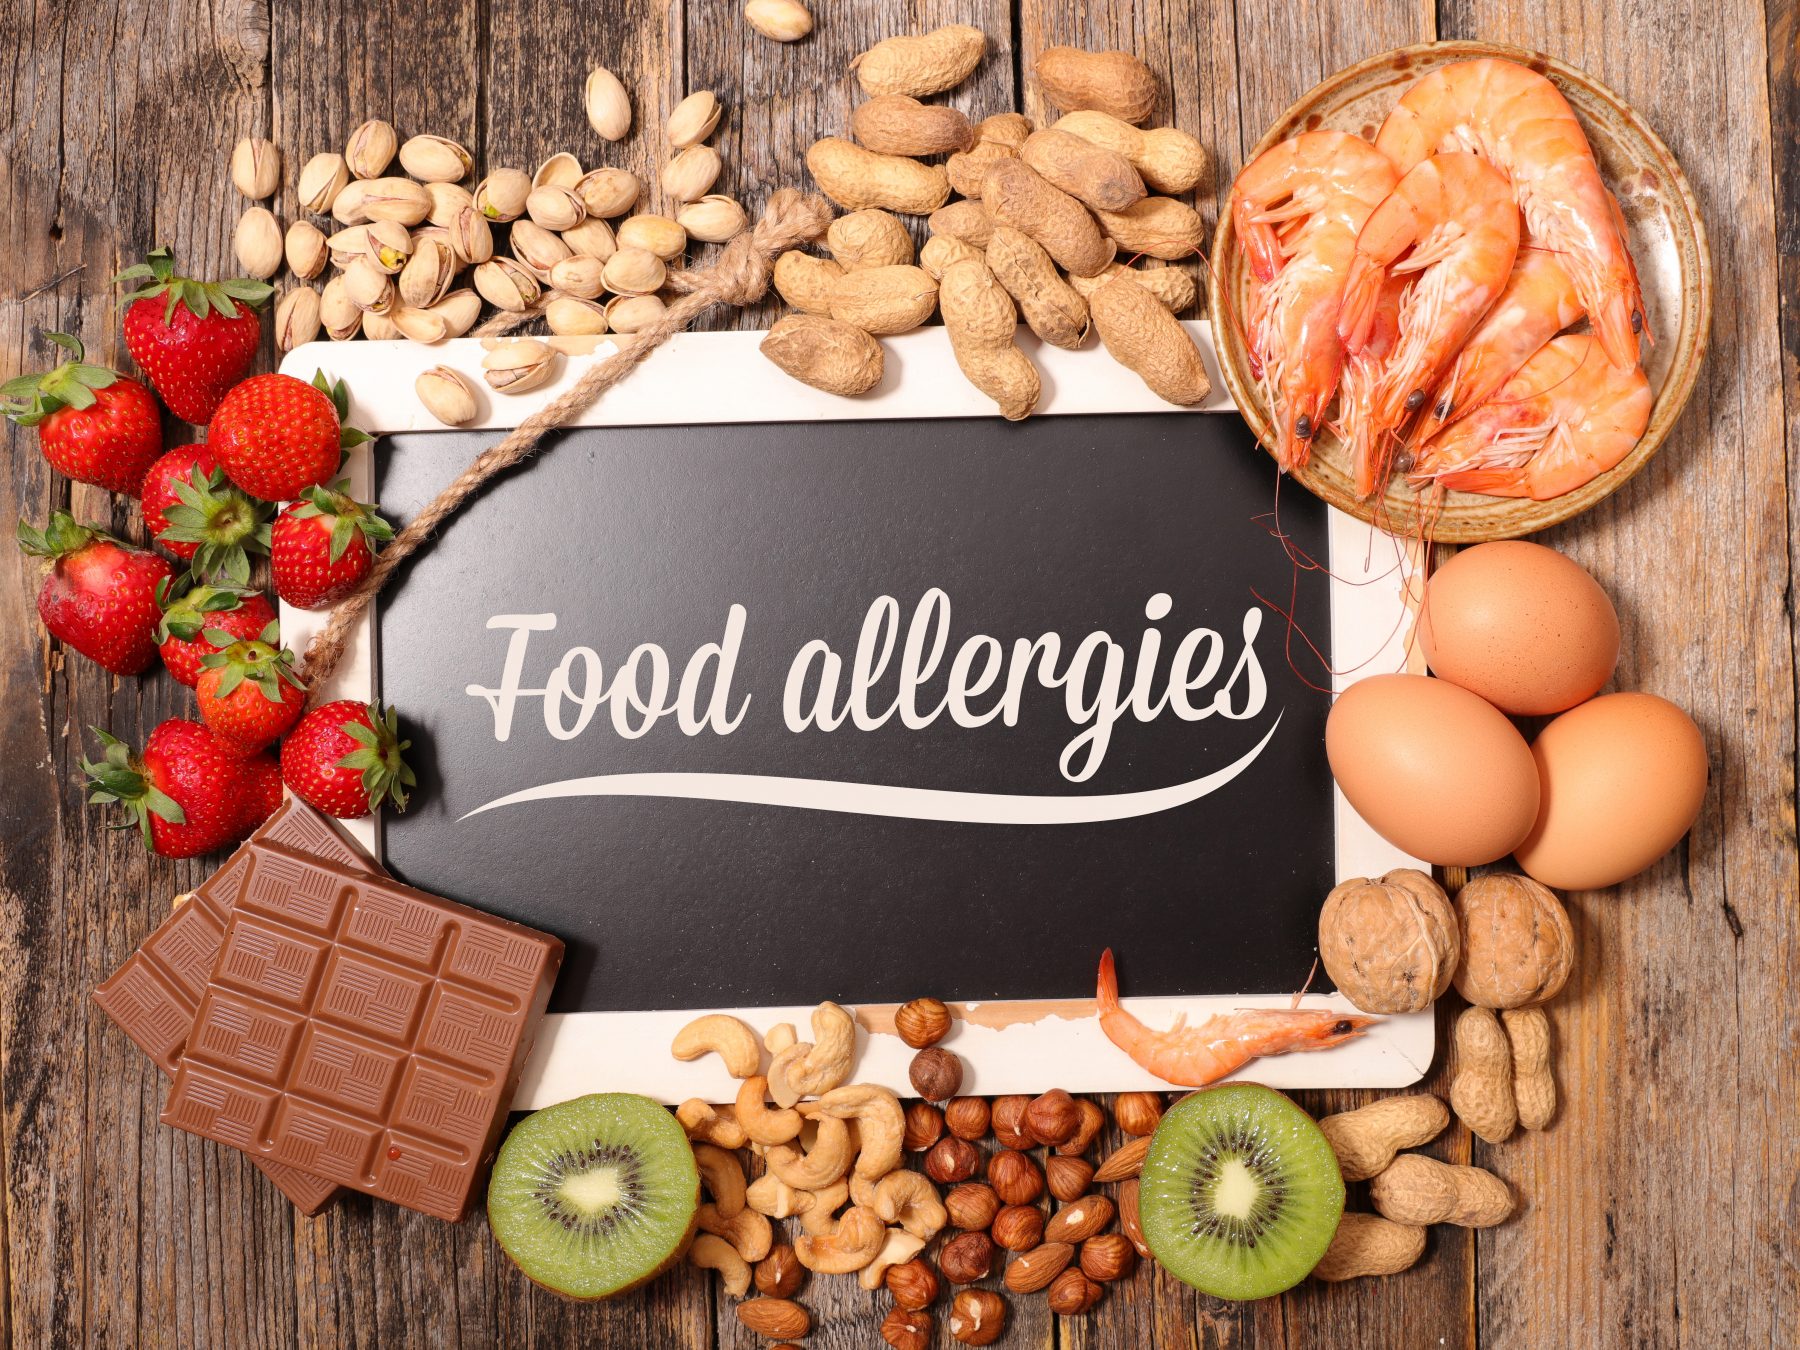 Food Allergies: Testing and Solutions